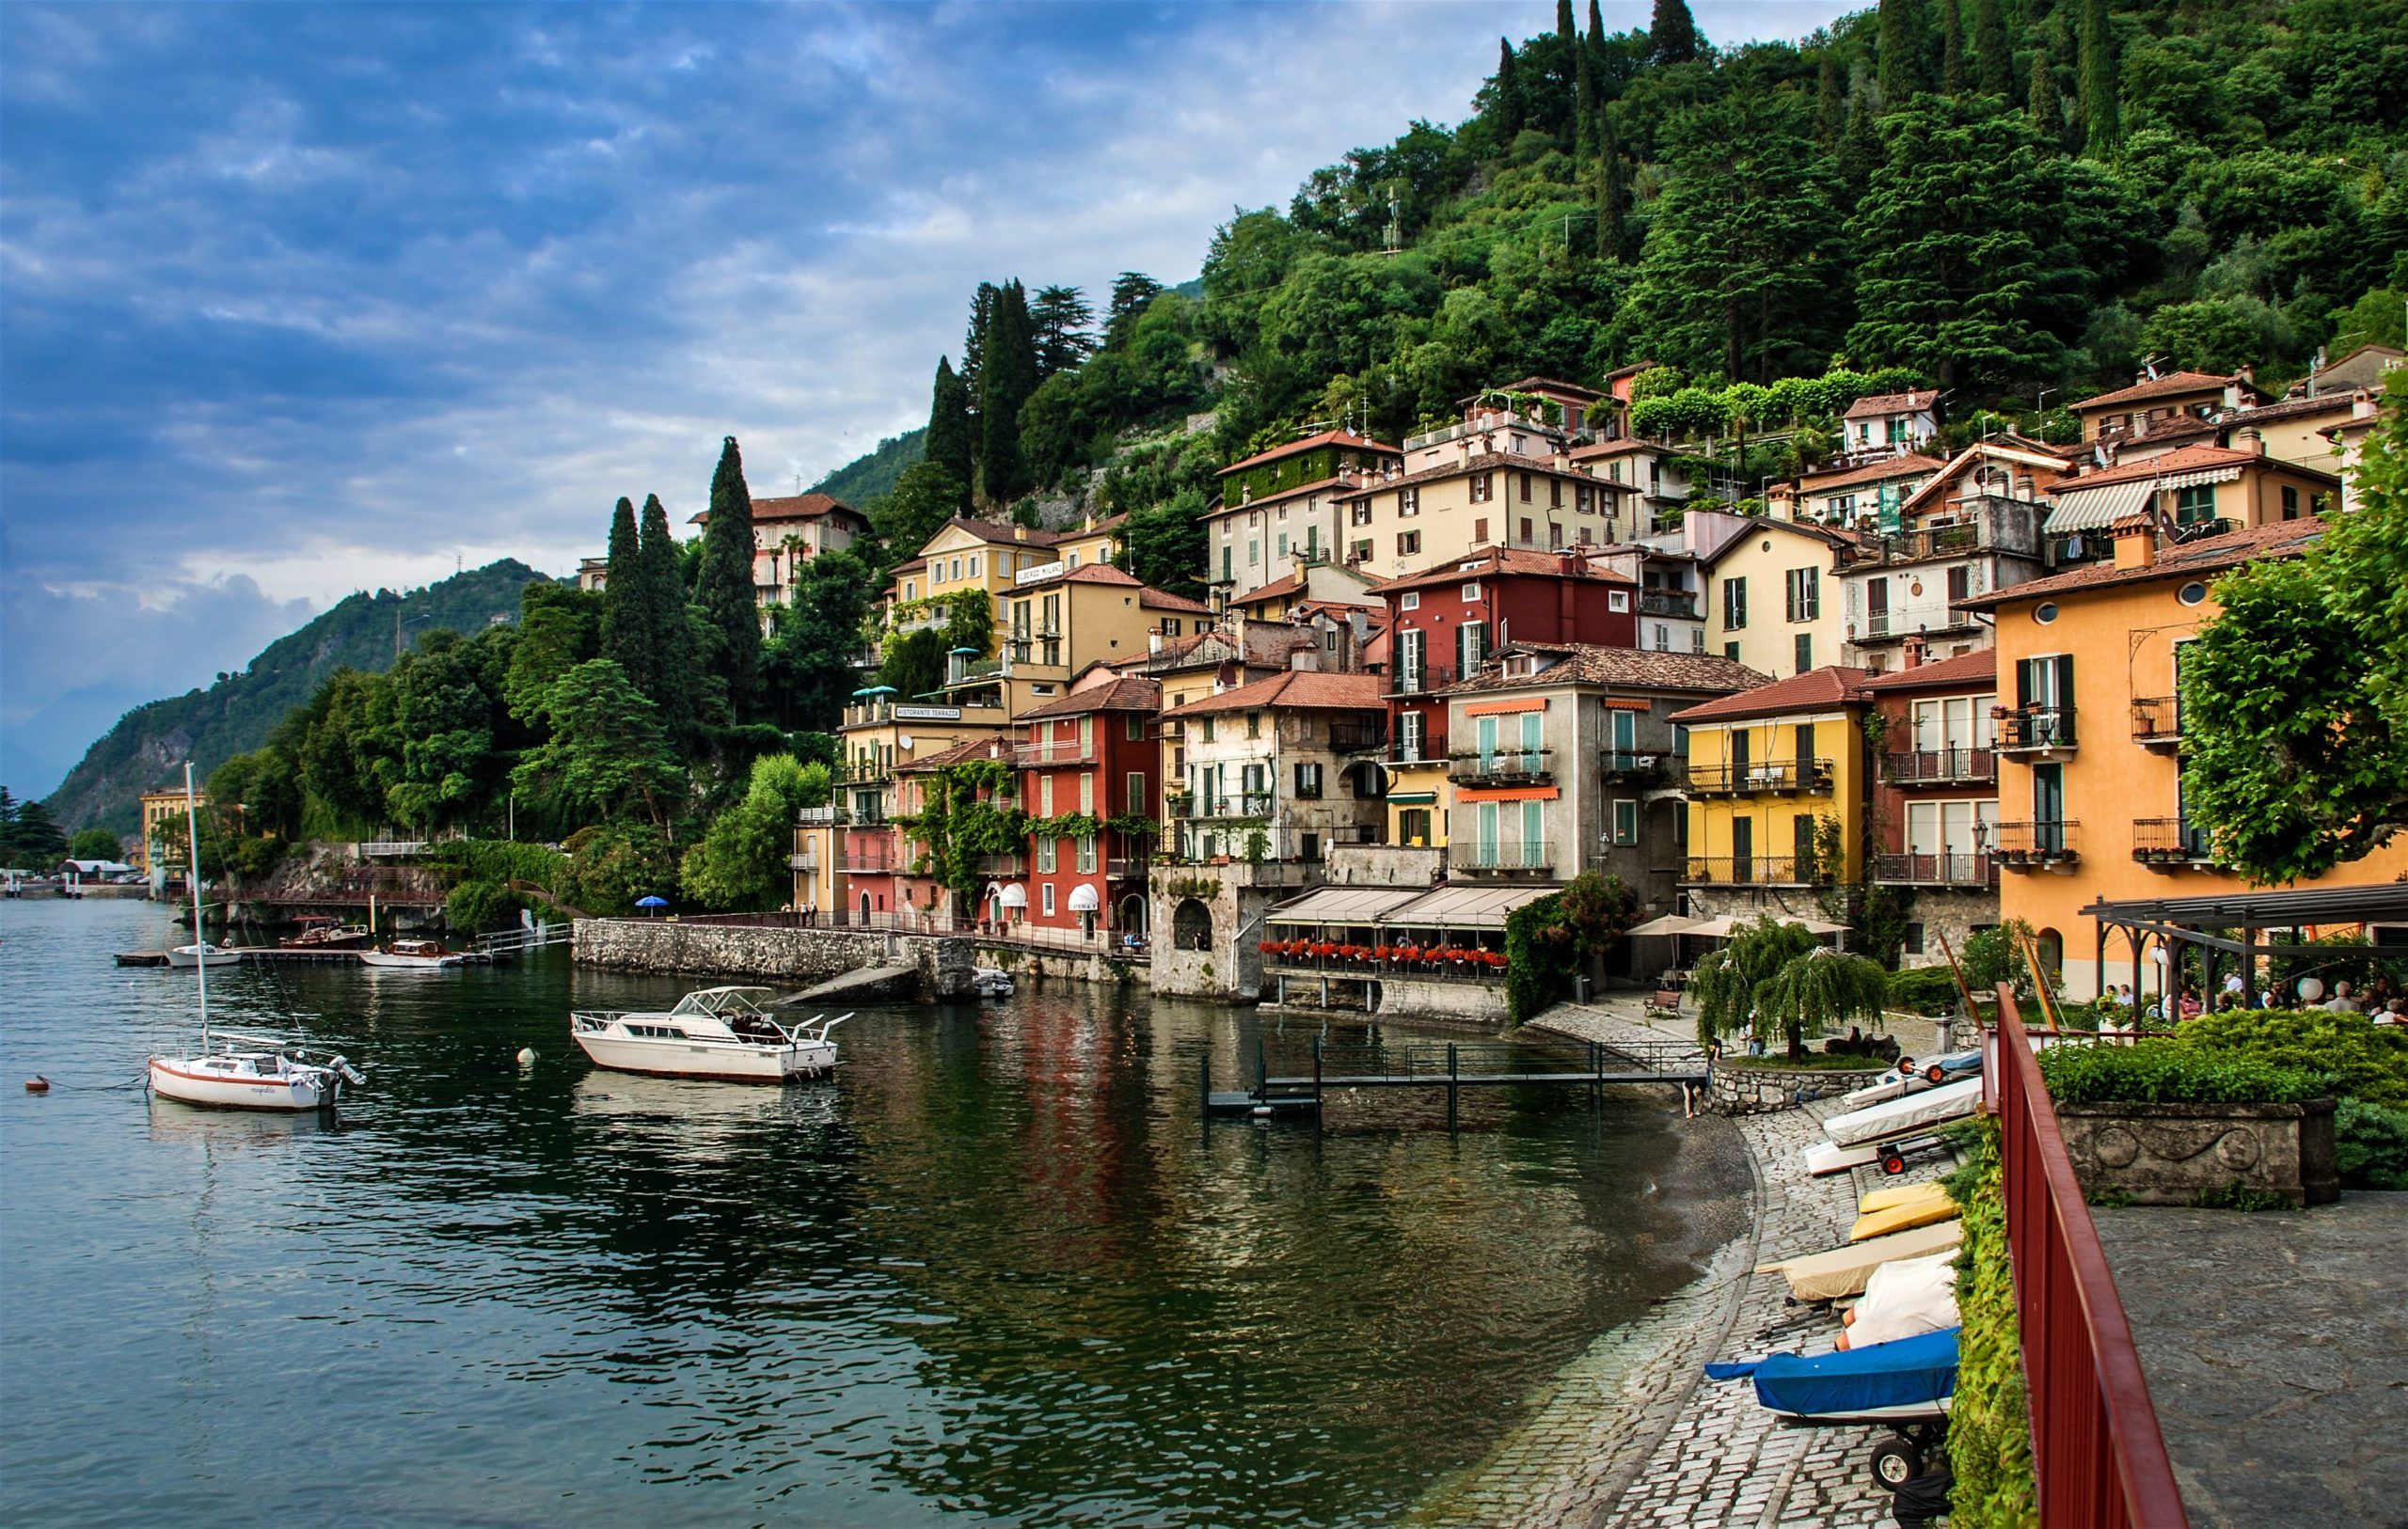 Lake Como Travel Guide: Why you need to visit this Italian island retreat